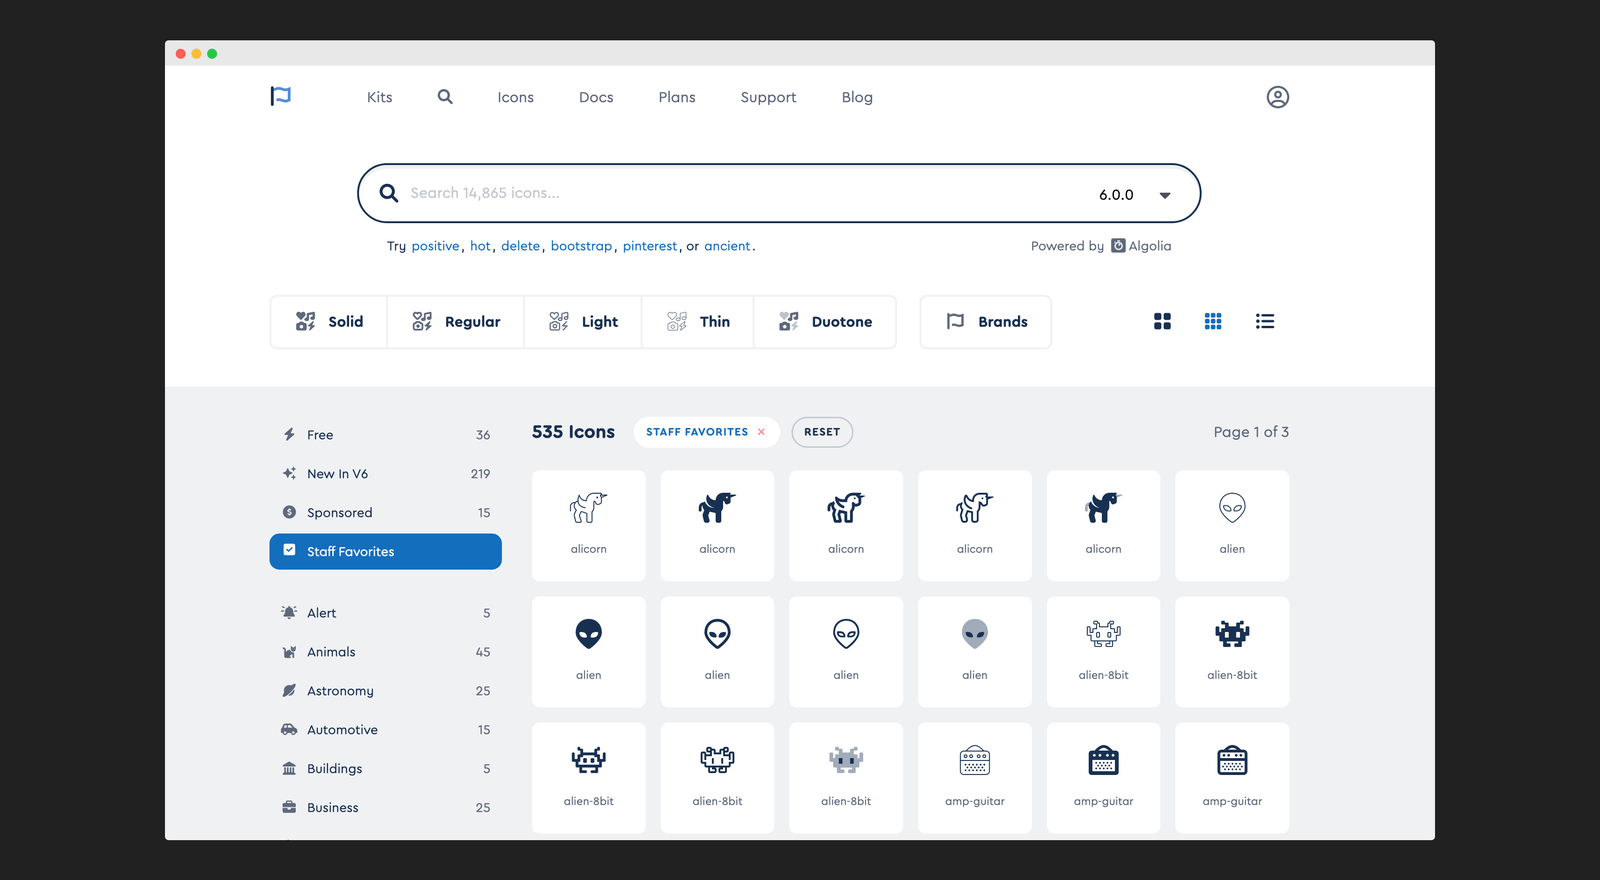 FontAwesome is a great choice for selecting high-quality icon and illustration sets